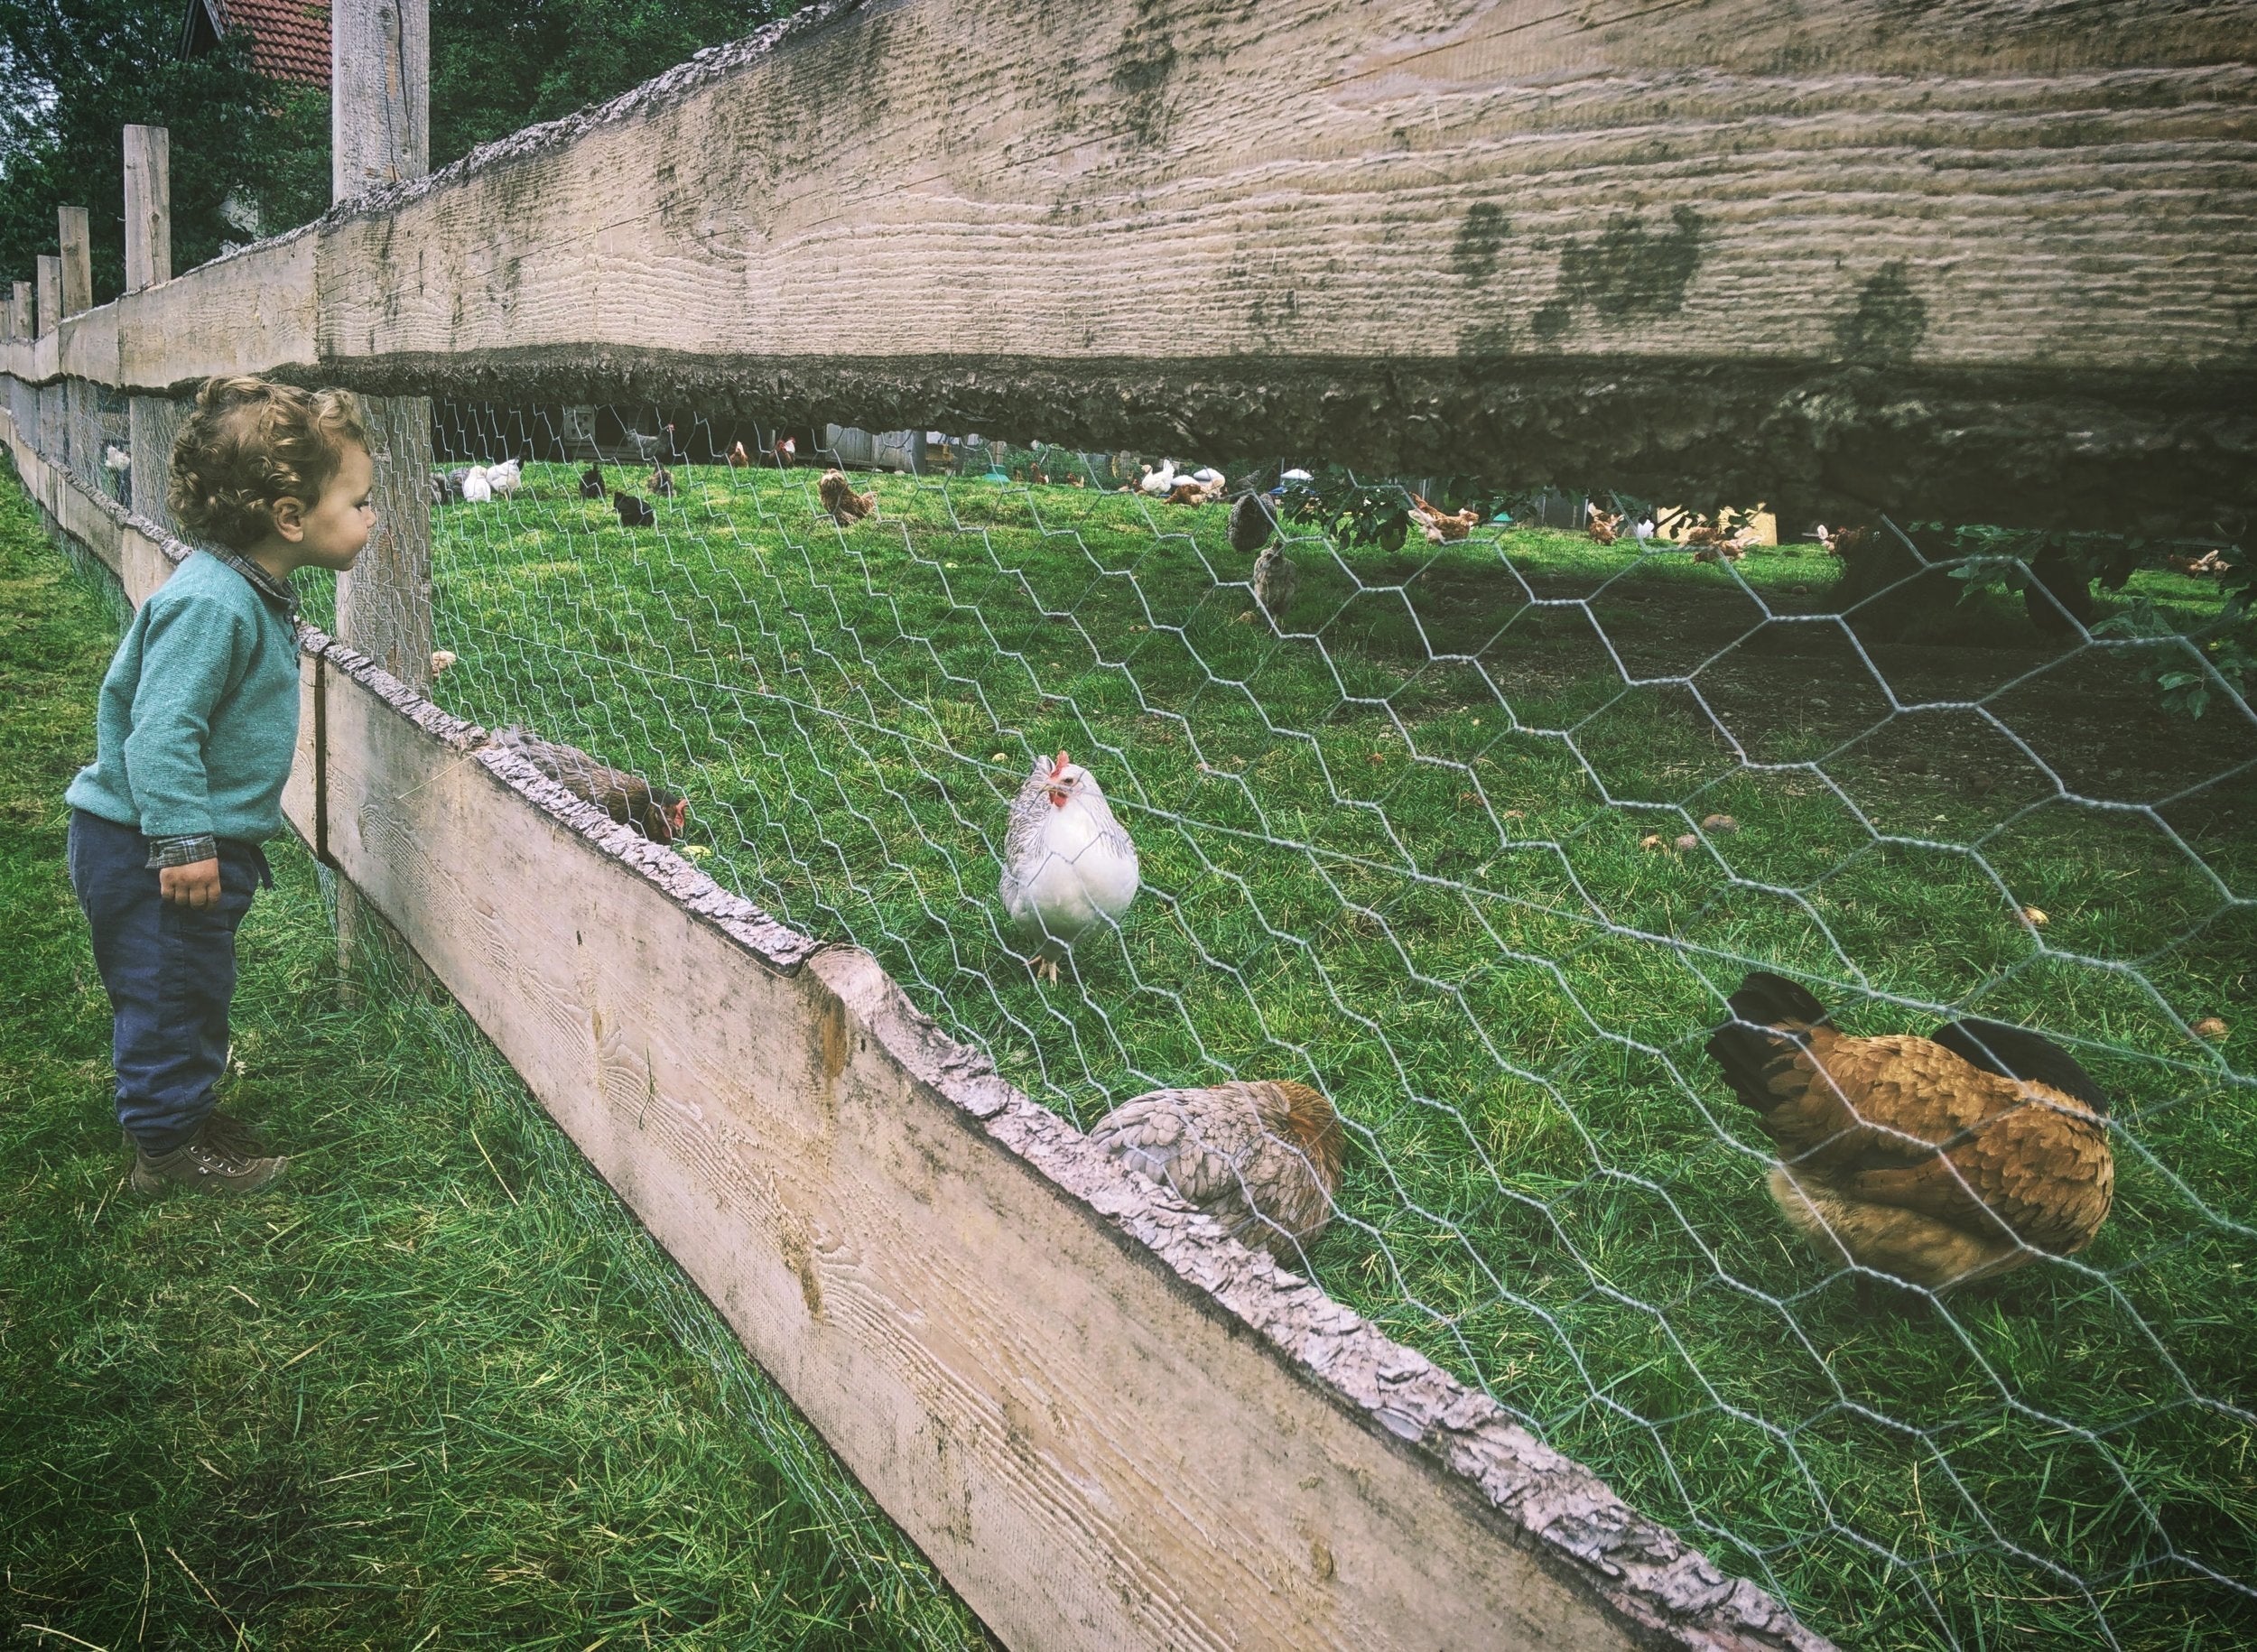 A homeschool kindergartener looking through a fence at chickens.